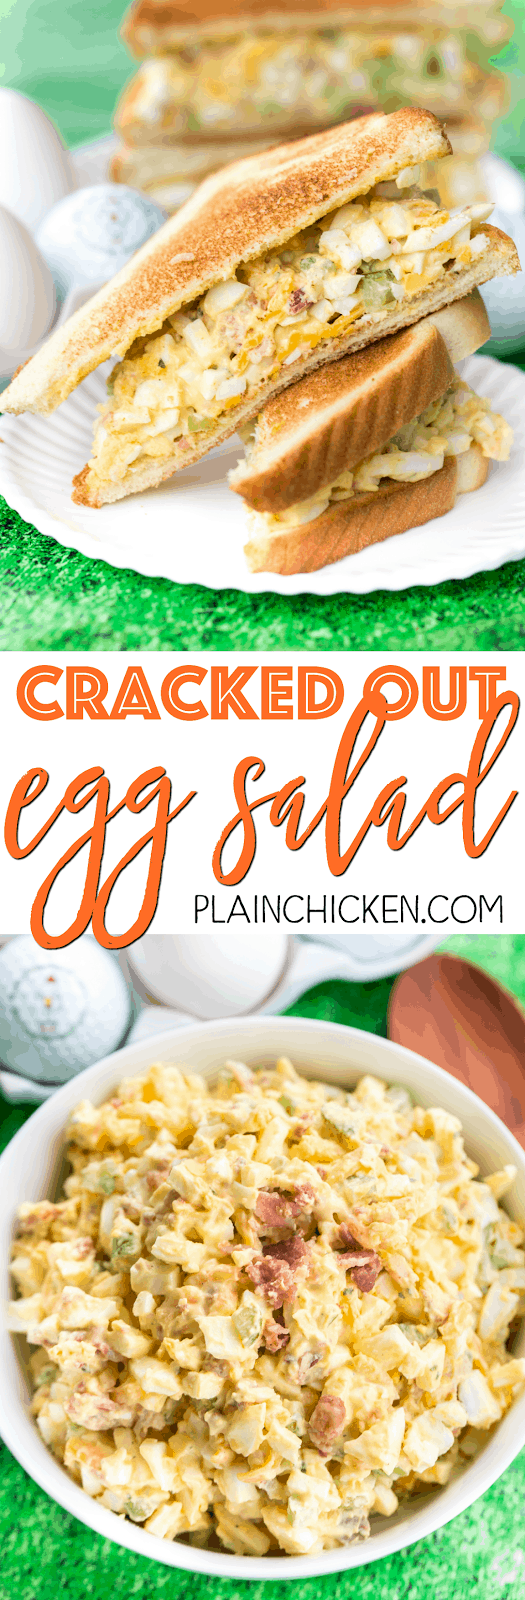 Cracked Out Egg Salad - OMG! Seriously delicious!!! Eggs, mayonnaise, Ranch mix, cheddar cheese, bacon, celery, vinegar and worcestershire. Can make ahead of time and refrigerate for later. I always make a double batch and it is gone in a flash! Everyone loves this easy egg salad recipe.